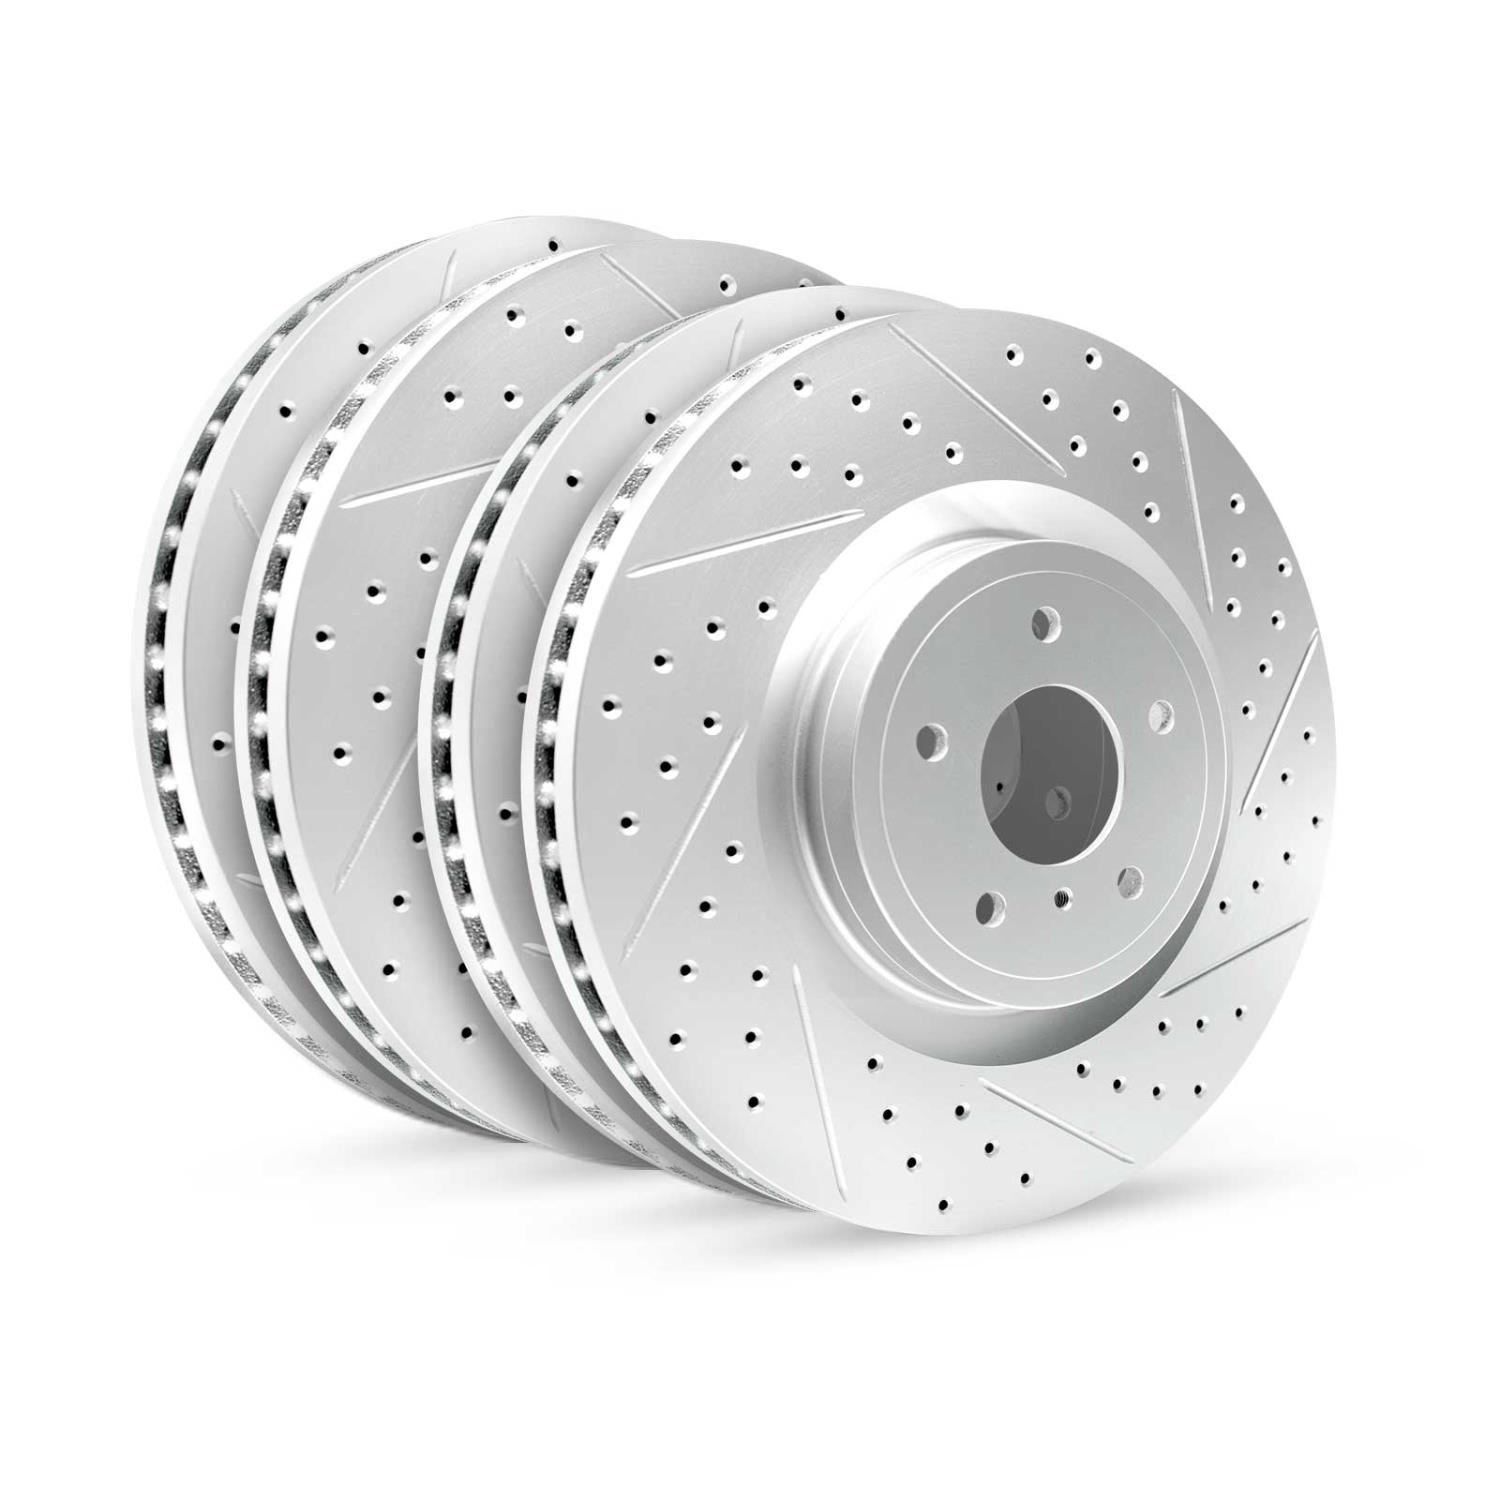 GEO-Carbon Drilled/Slotted Rotors, 2014-2018 Ford/Mazda,